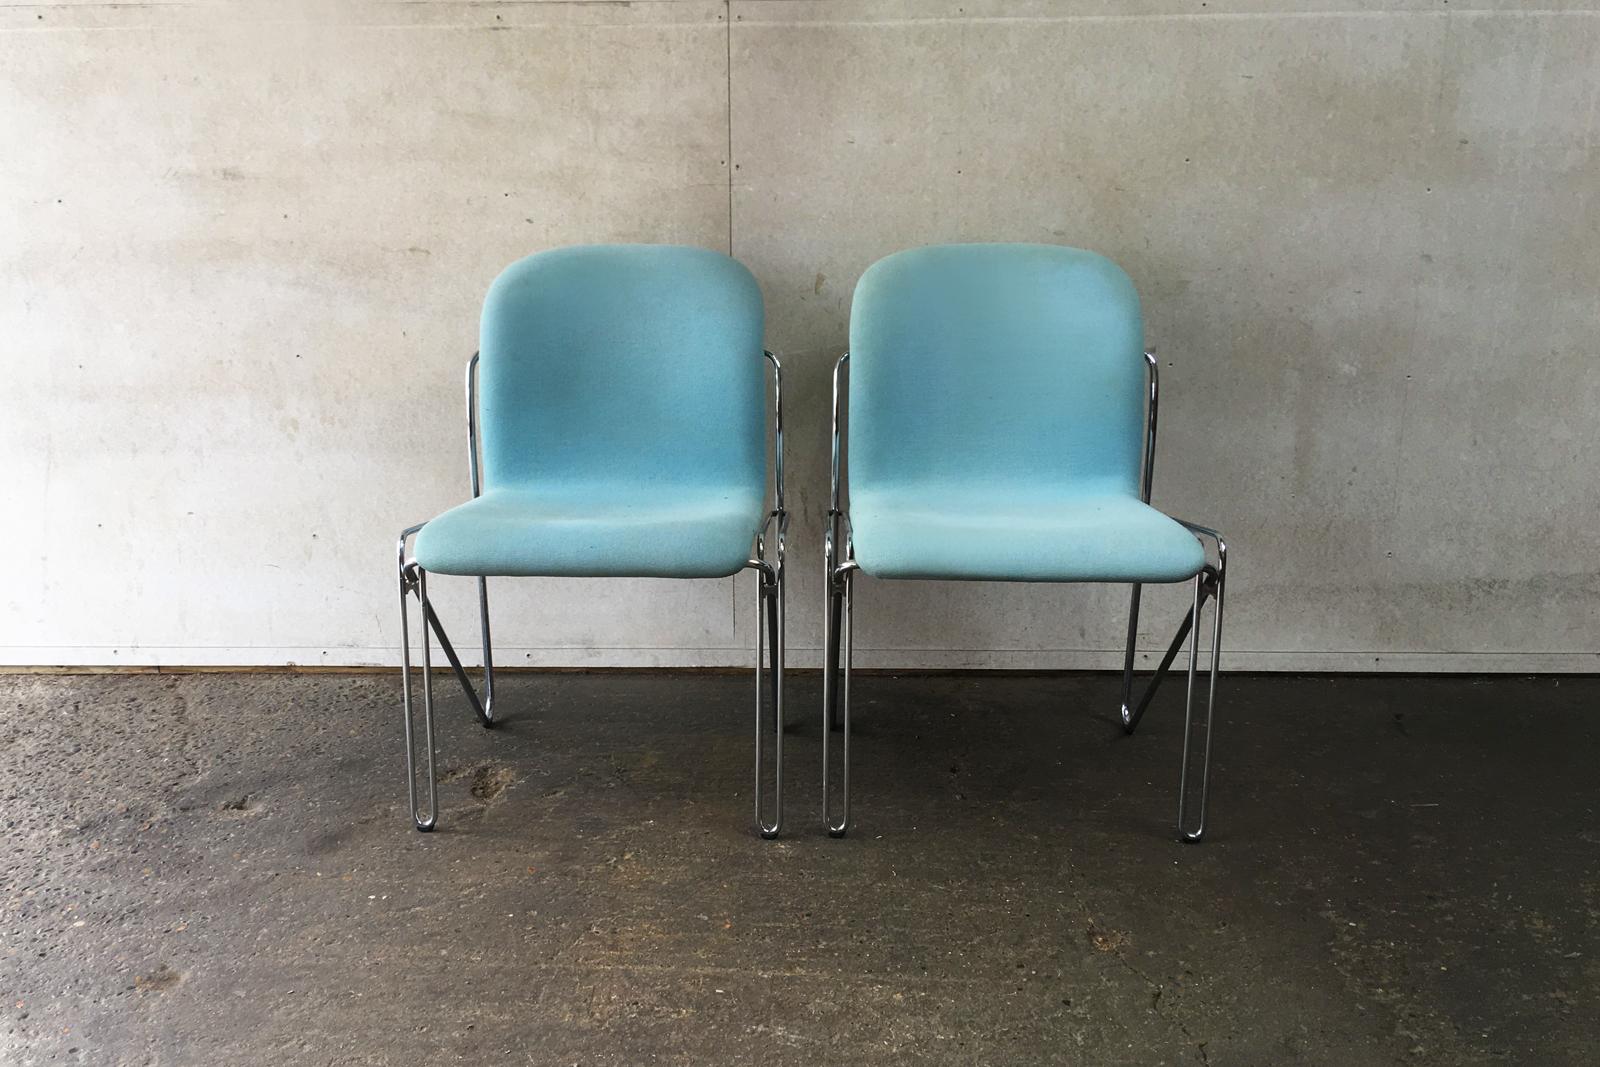 By the renowned Danish office furniture maker ‘Labofa’, this is a pair of beautifully shaped meeting or desk chairs, with the original light blue upholstery and chrome plated tubular steel frames.

Makers label attached to underside of